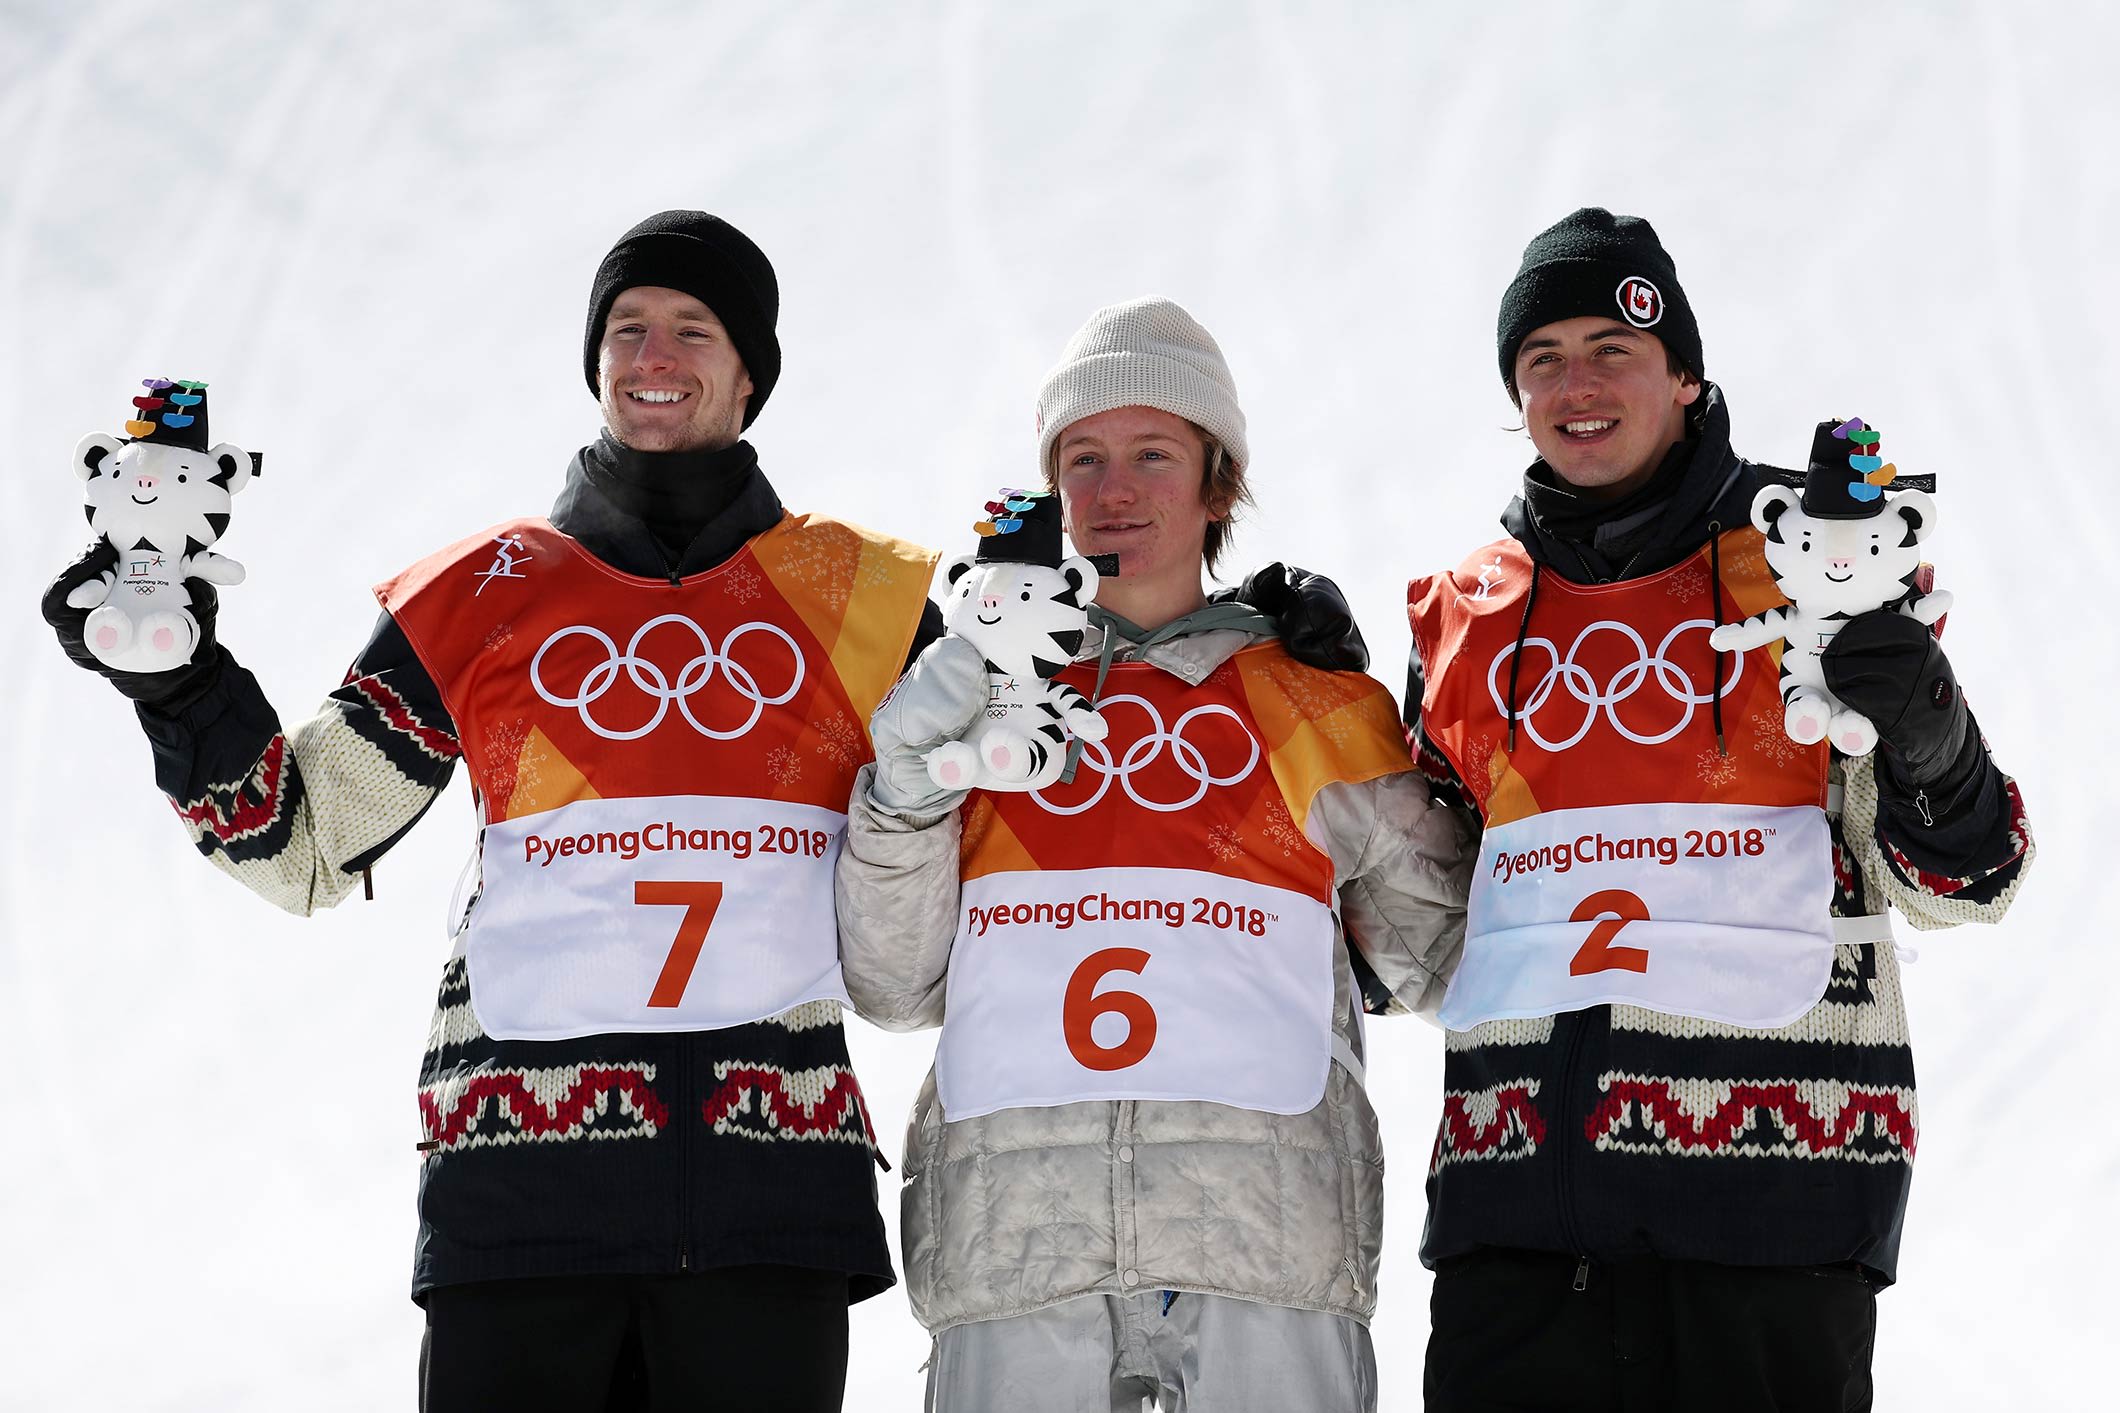 A perfect backside triple edged US teenager Redmond Gerard ahead in a tense men’s snowboarding slopestyle final, ahead of Canadian pair Maxence Parrot and Mark McMorris